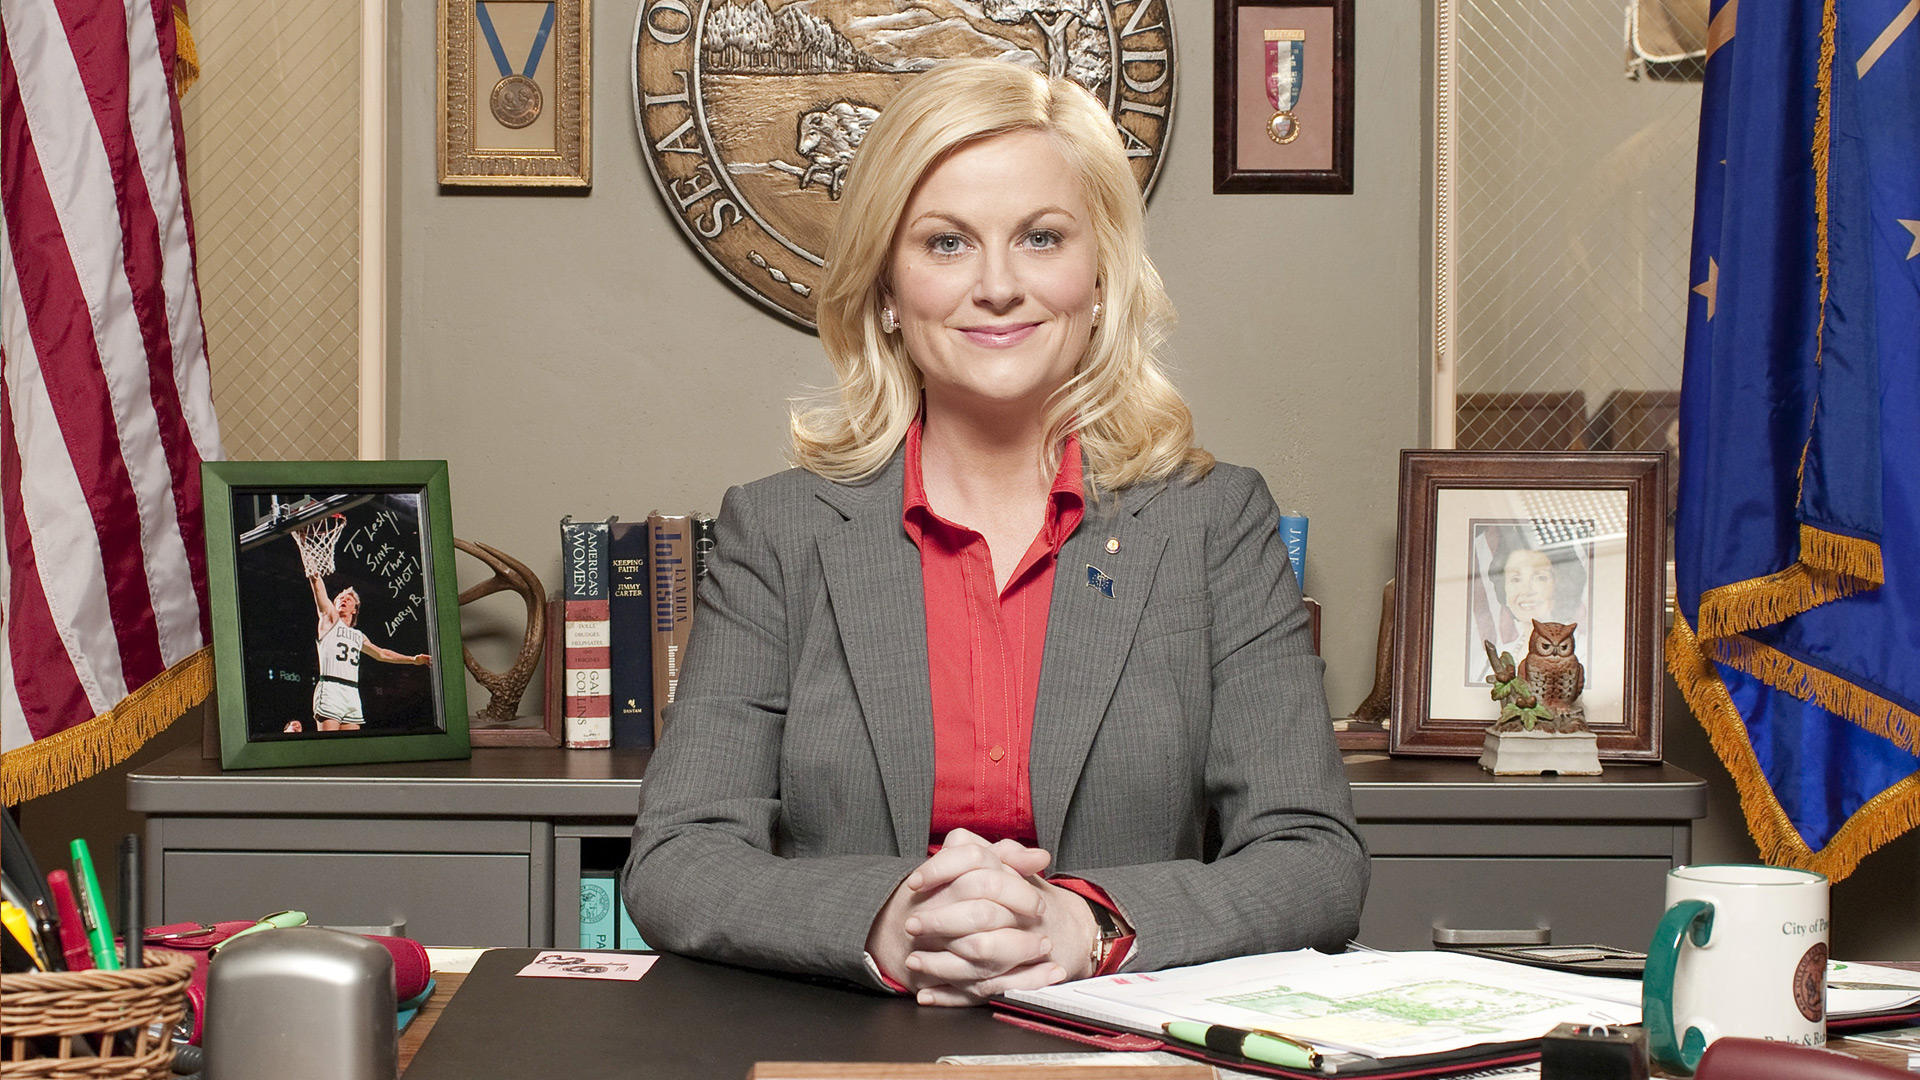 Amy Poehler blasts NRA for using "Parks and Rec" image - CBS News